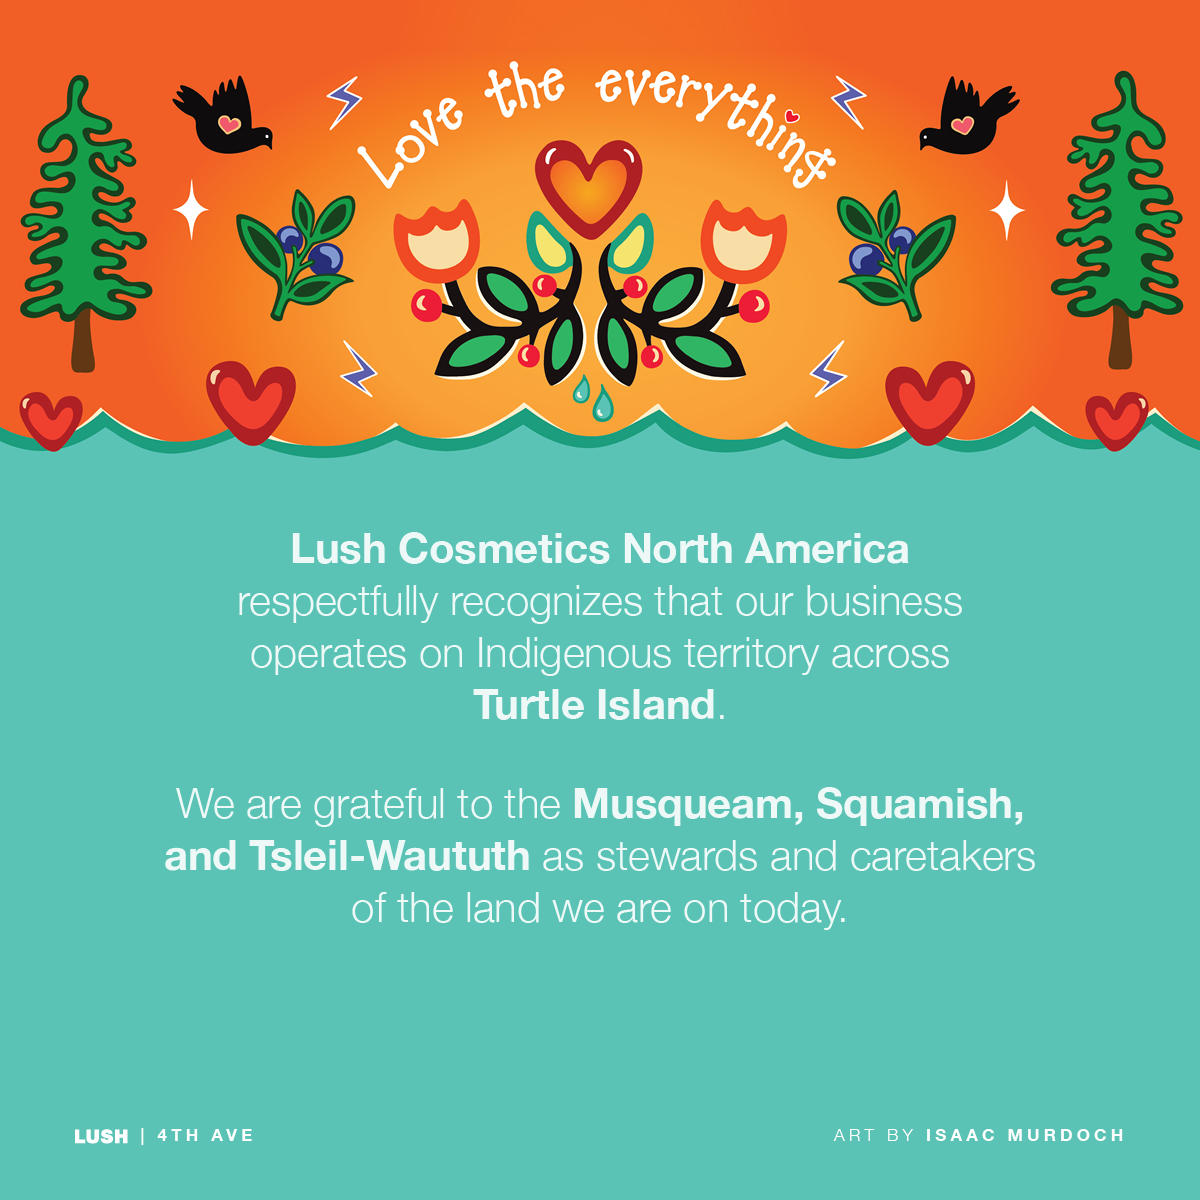 Lush Cosmetics North America respectfully recognizes our business operates on Indigenous territory a Lush Cosmetics Fourth Ave Vancouver (604)733-5874